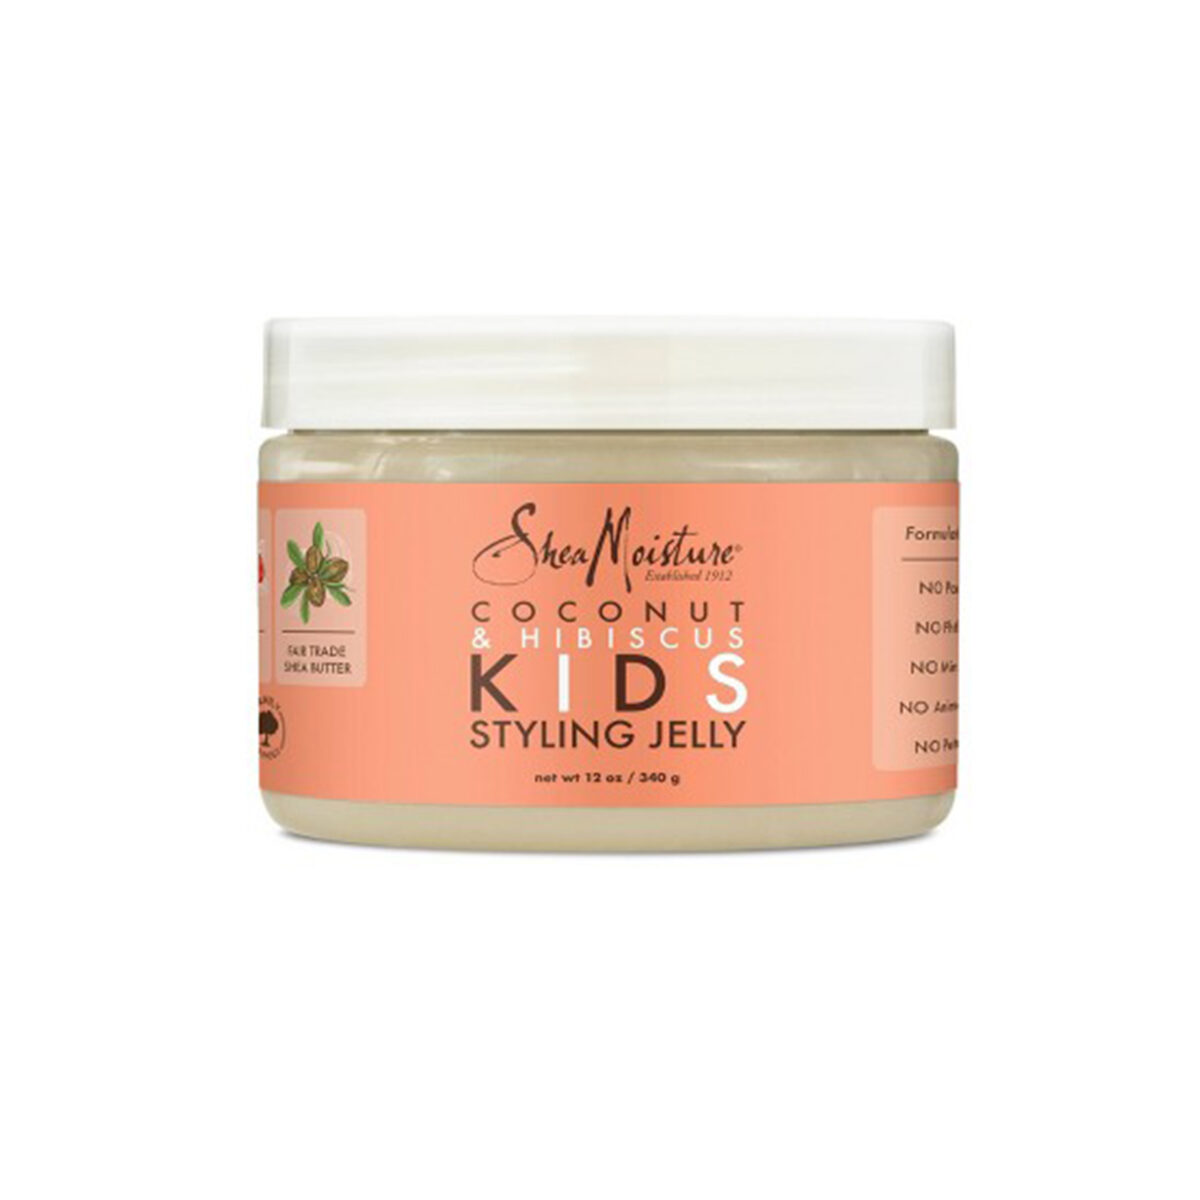 Sheamoisture - Kids styling jelly Ohmykajo curly hair care, hair loss treatment, curly hair products Sheamoisture - Kids styling jelly